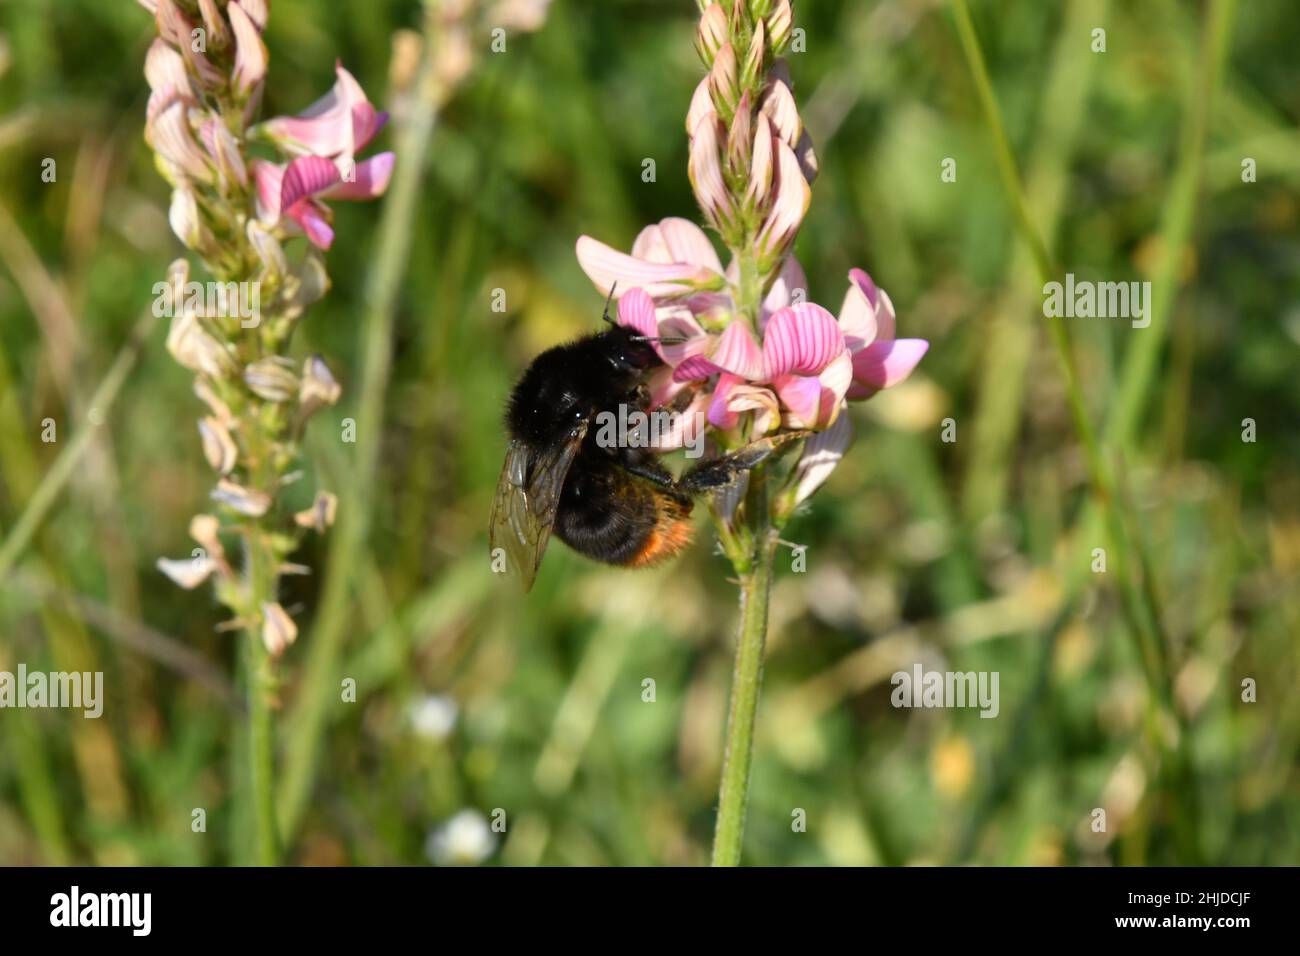 A Bumble Bee extracting nectar from a Sainfoin 'Onobrychis vicifolia'pollinating the flower at the same time.Sainfoin is grown as a forage crop on lim Stock Photo